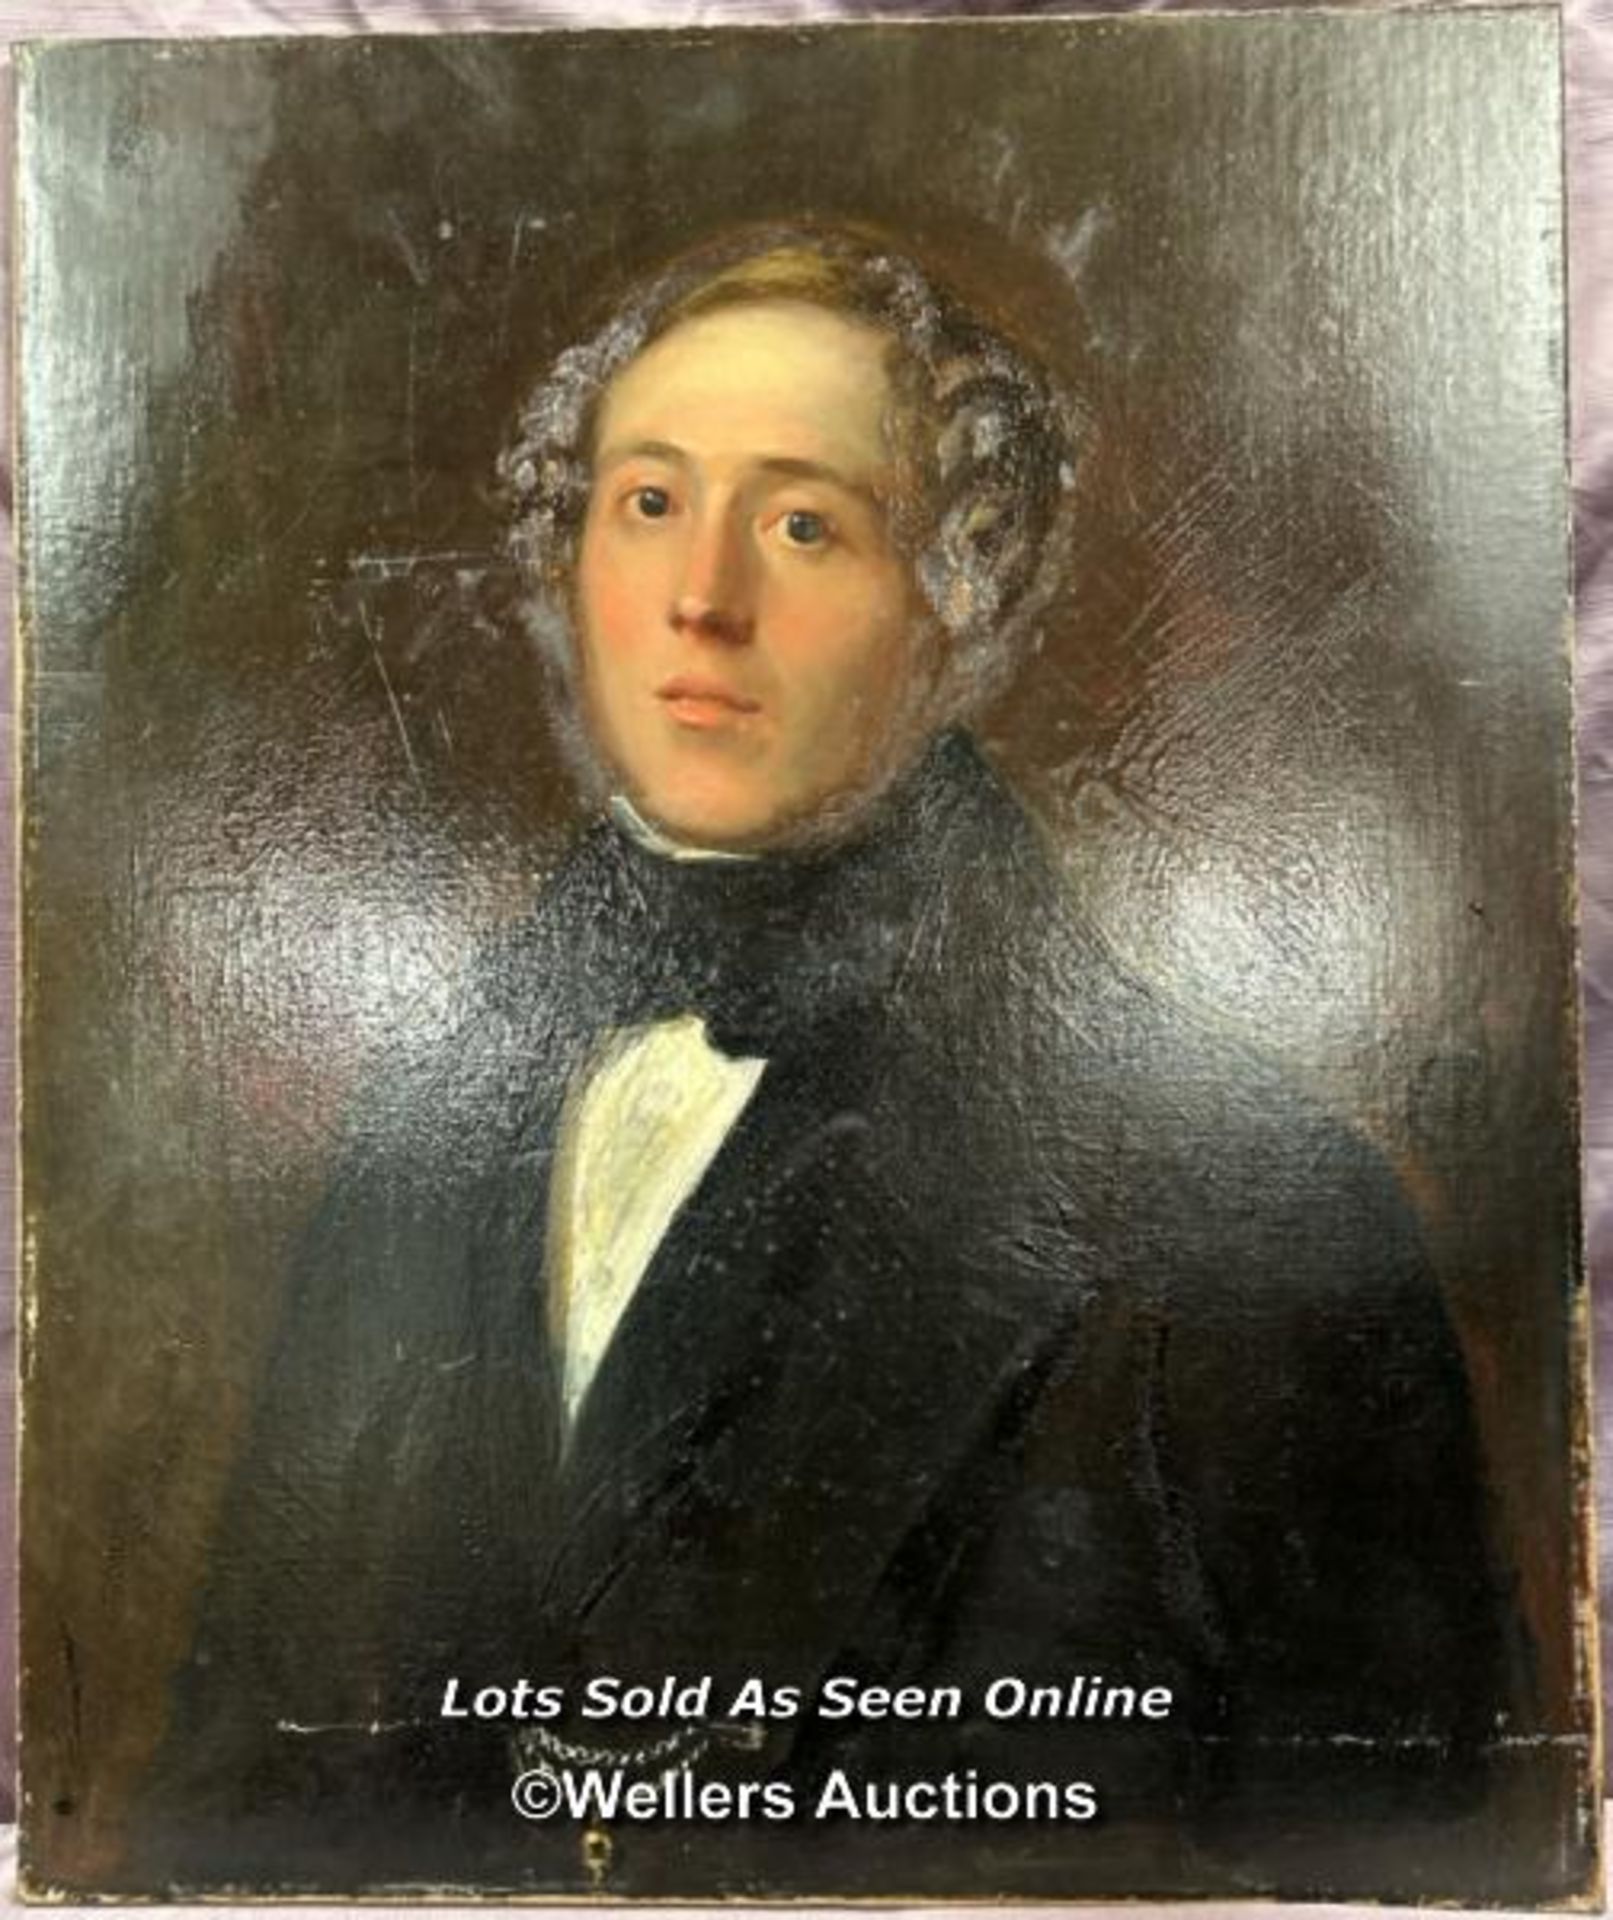 OIL ON CANVAS DEPICTING AN EARLY 19TH CENTURY GENTLEMAN, 76 X 64CM